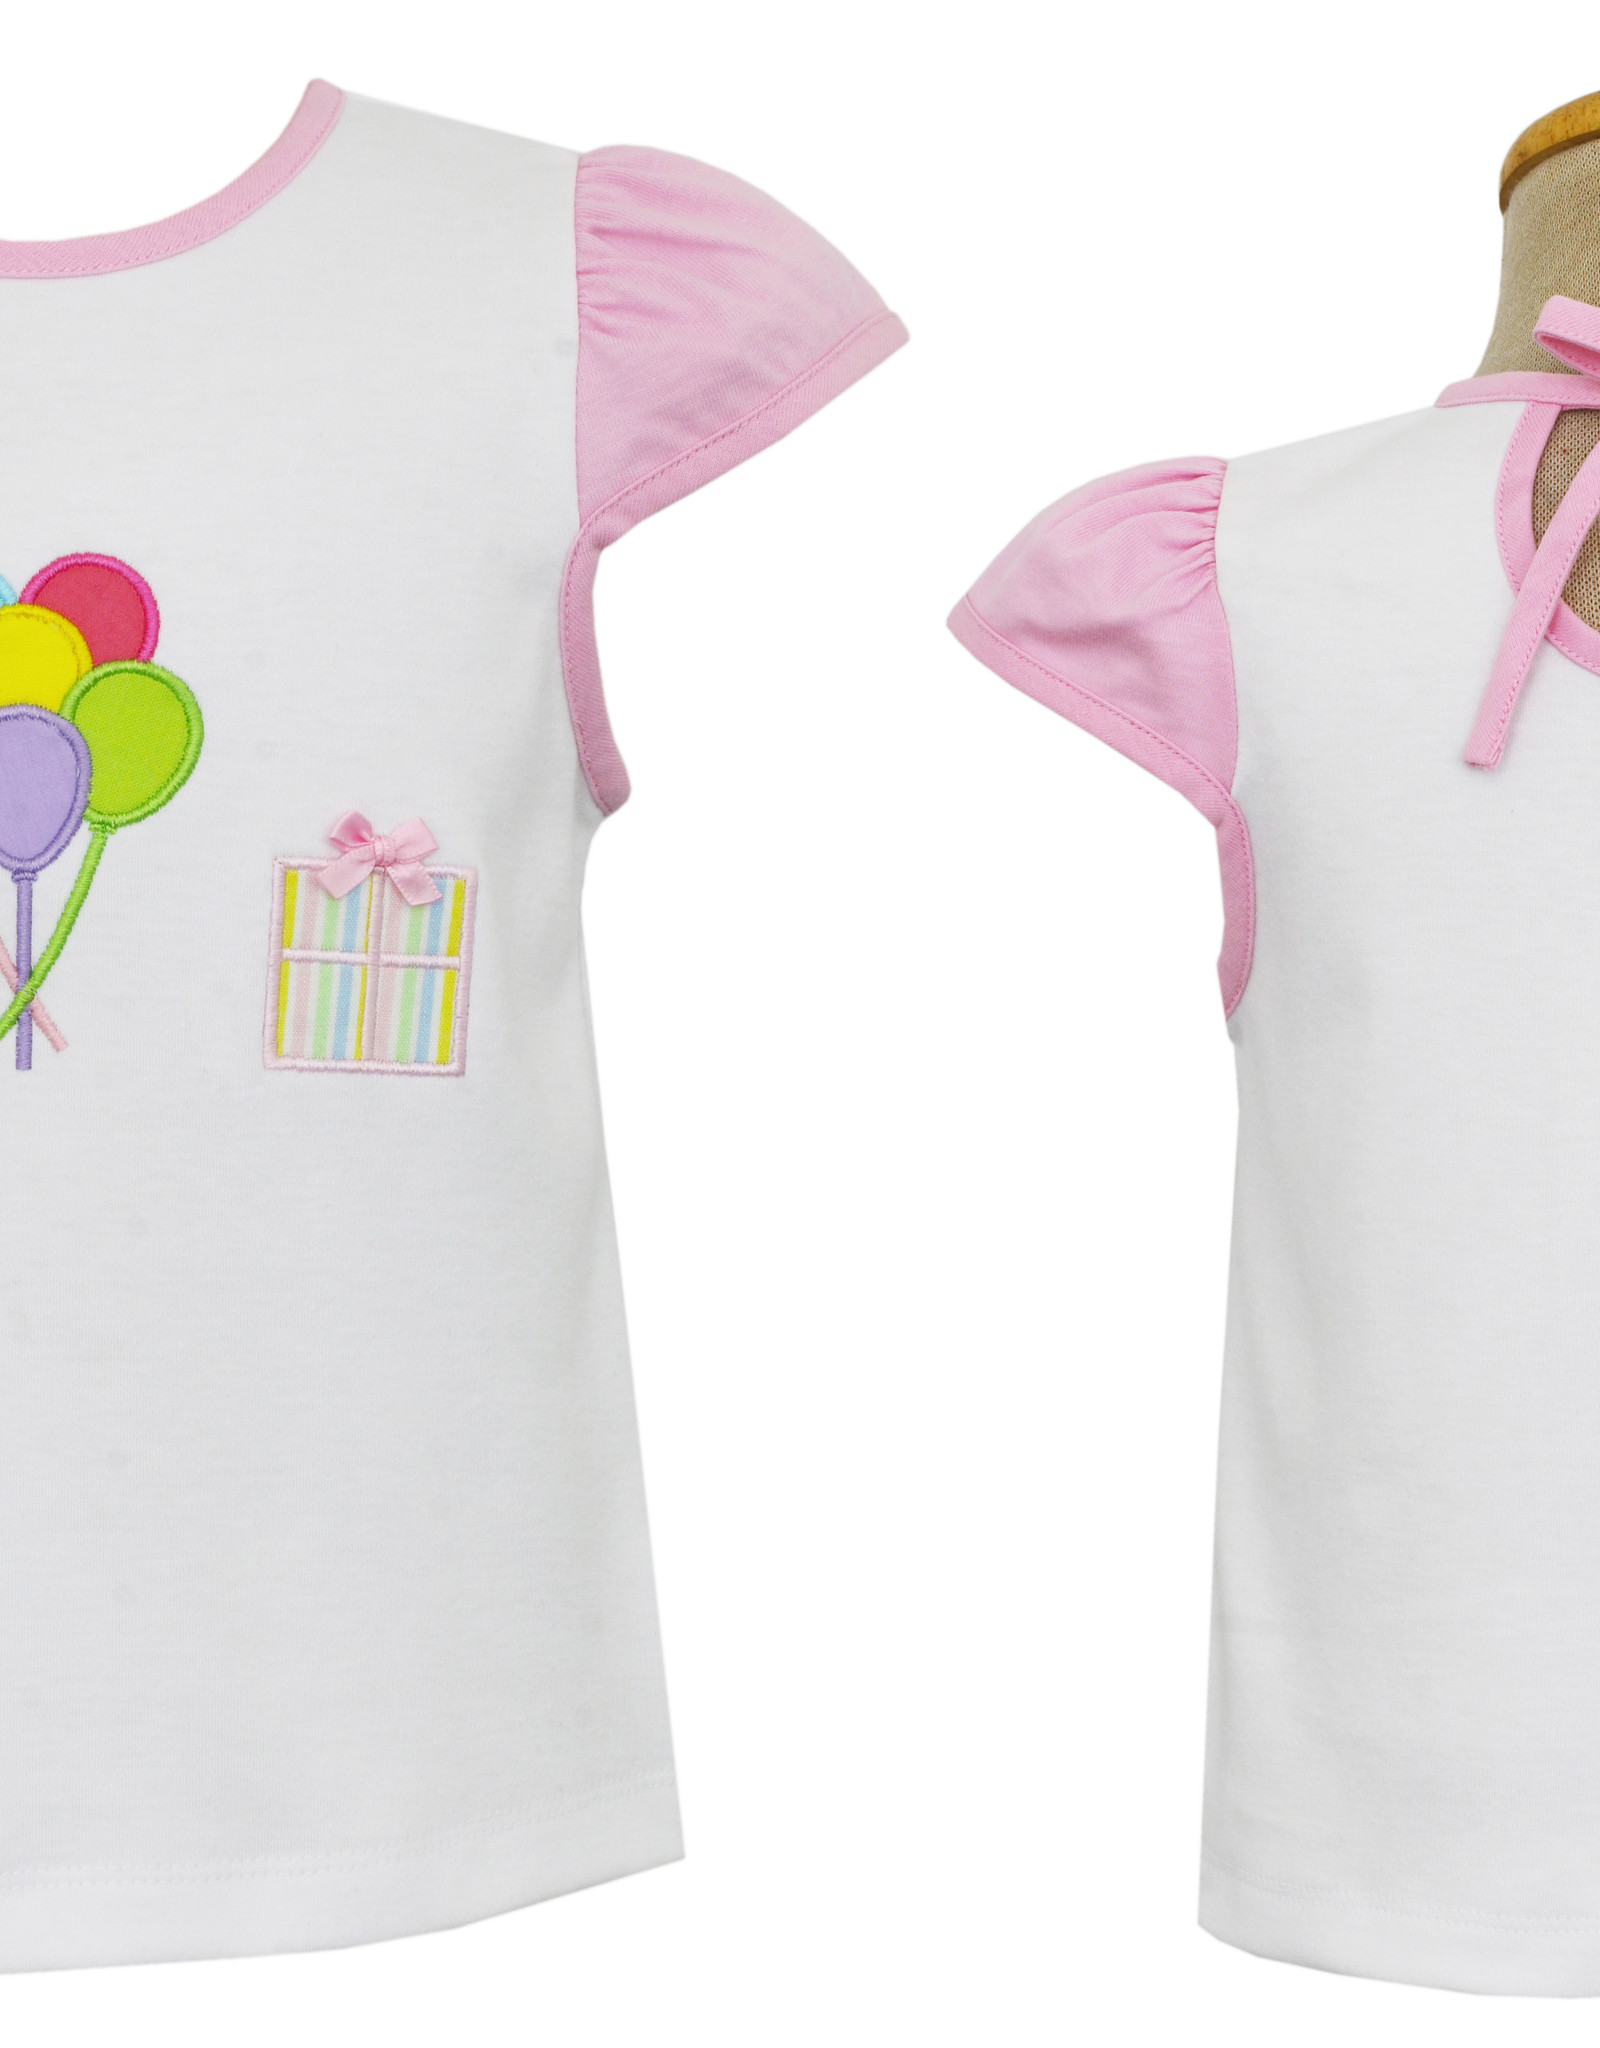 Claire and Charlie Knit Birthday Tee with Pink Sleeve